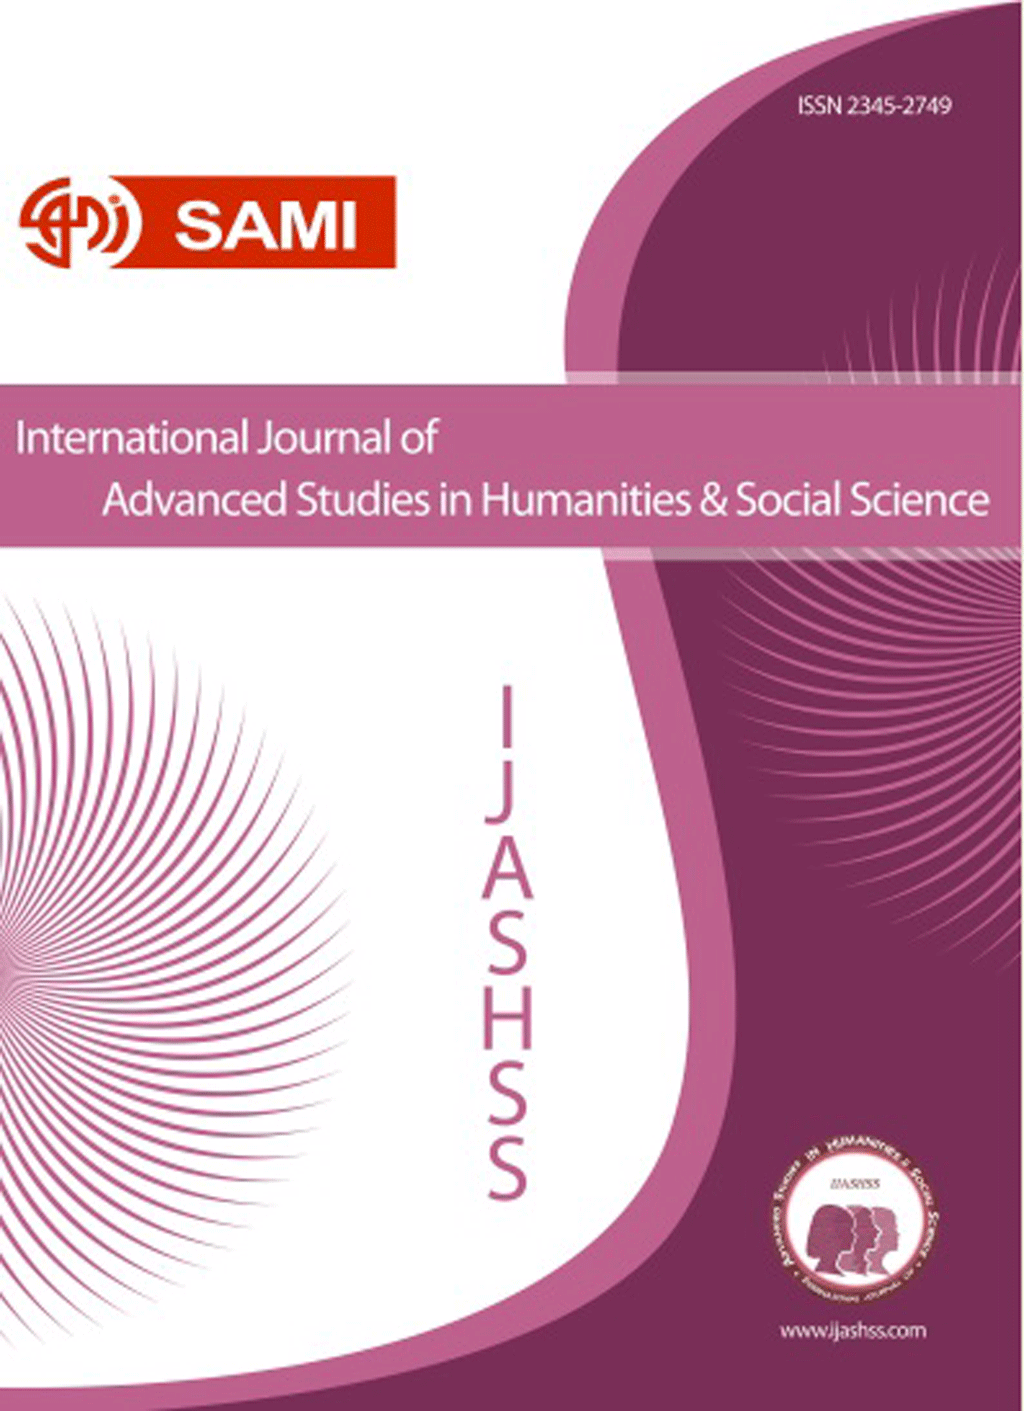 International Journal of Advanced Studies in Humanities and Social Science - January 2022, Volume 11 -  Issue 1